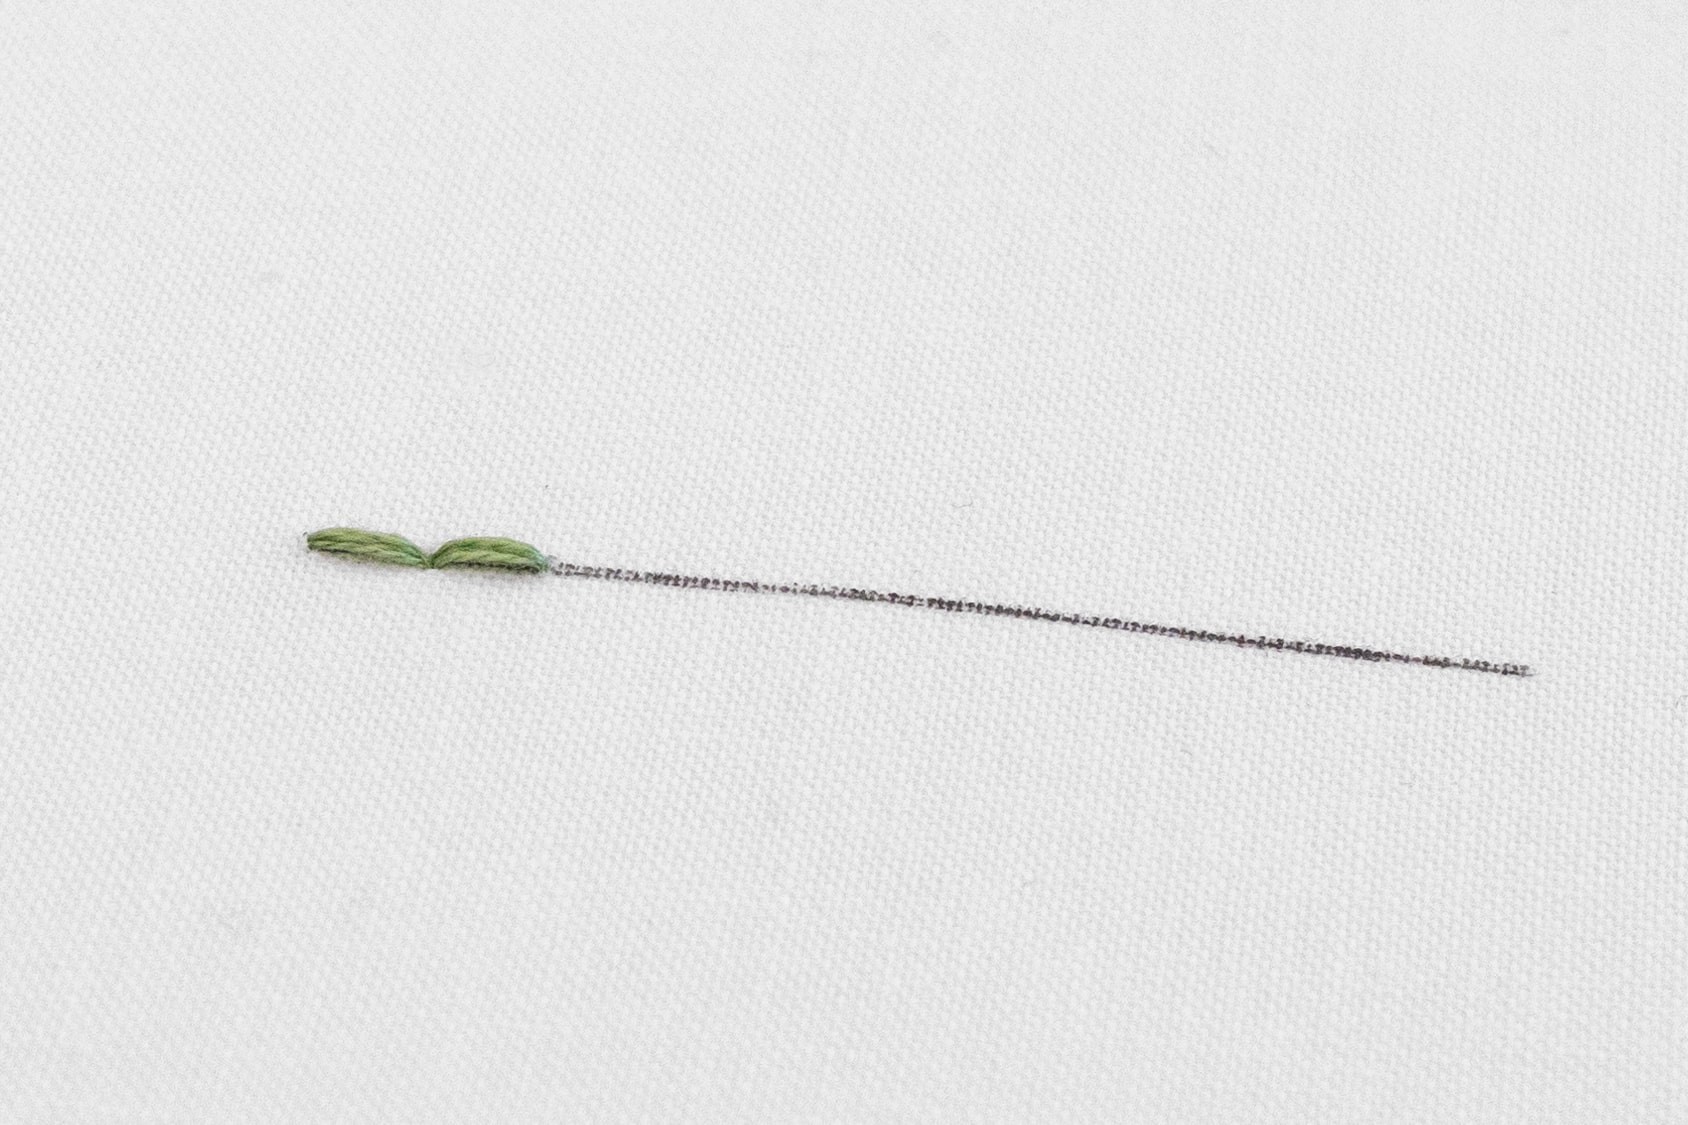 A second stitch has been created on a piece of embroidery fabric.